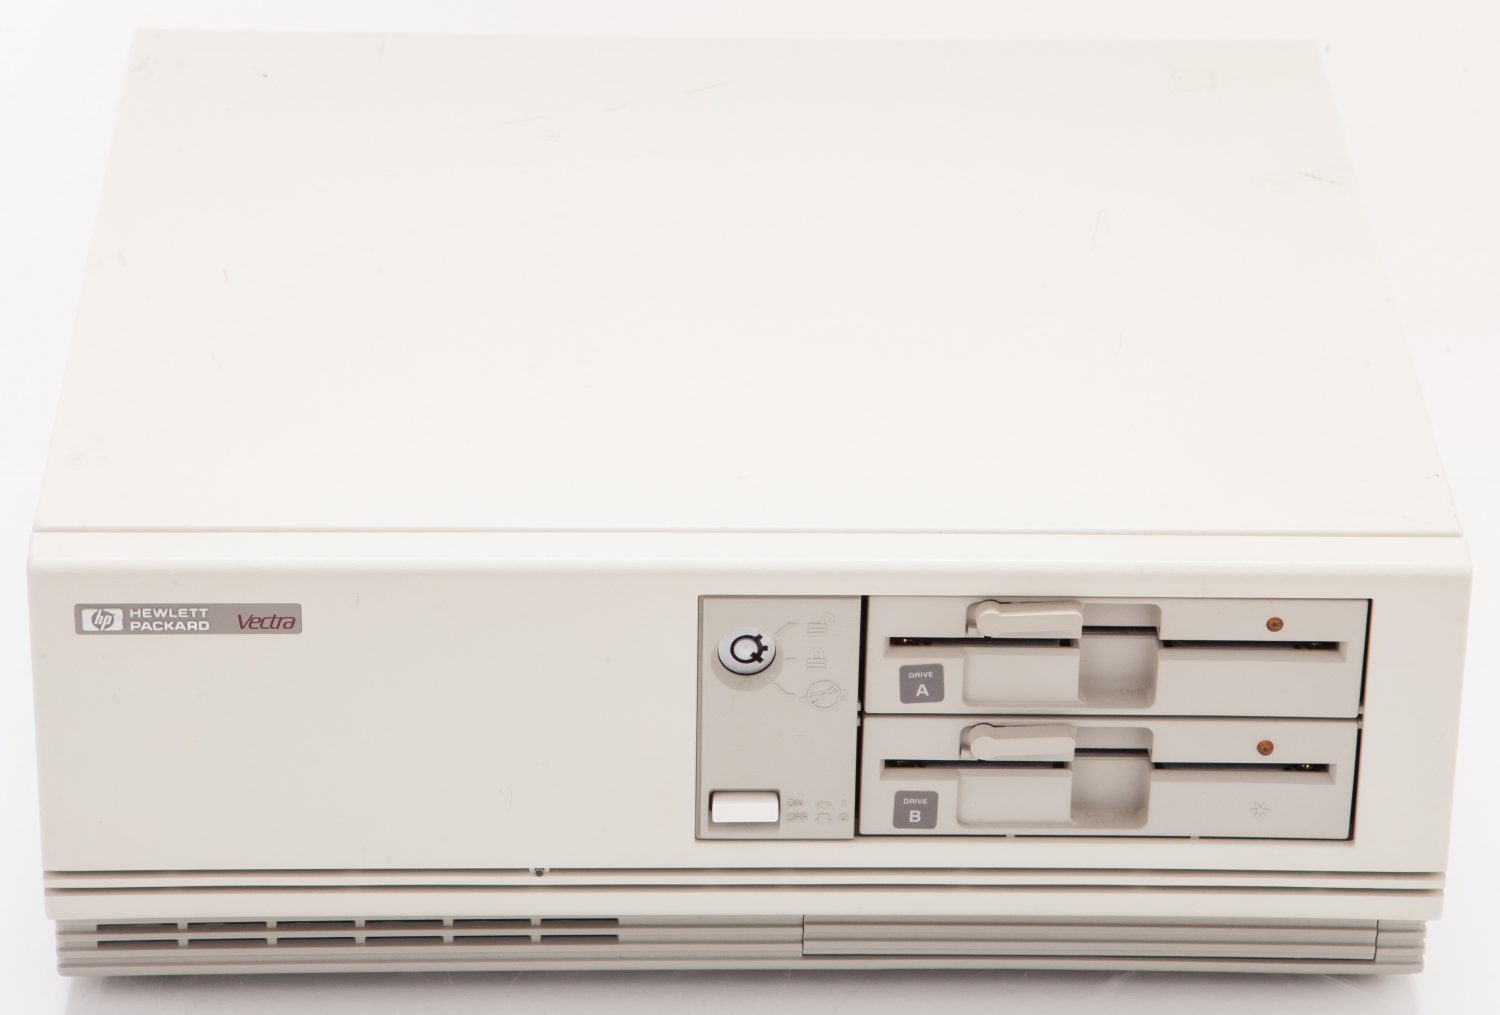 HP Vectra owned by Bill Hewlett. The Vectra was the first HP PC to use the IBM-PC platform.